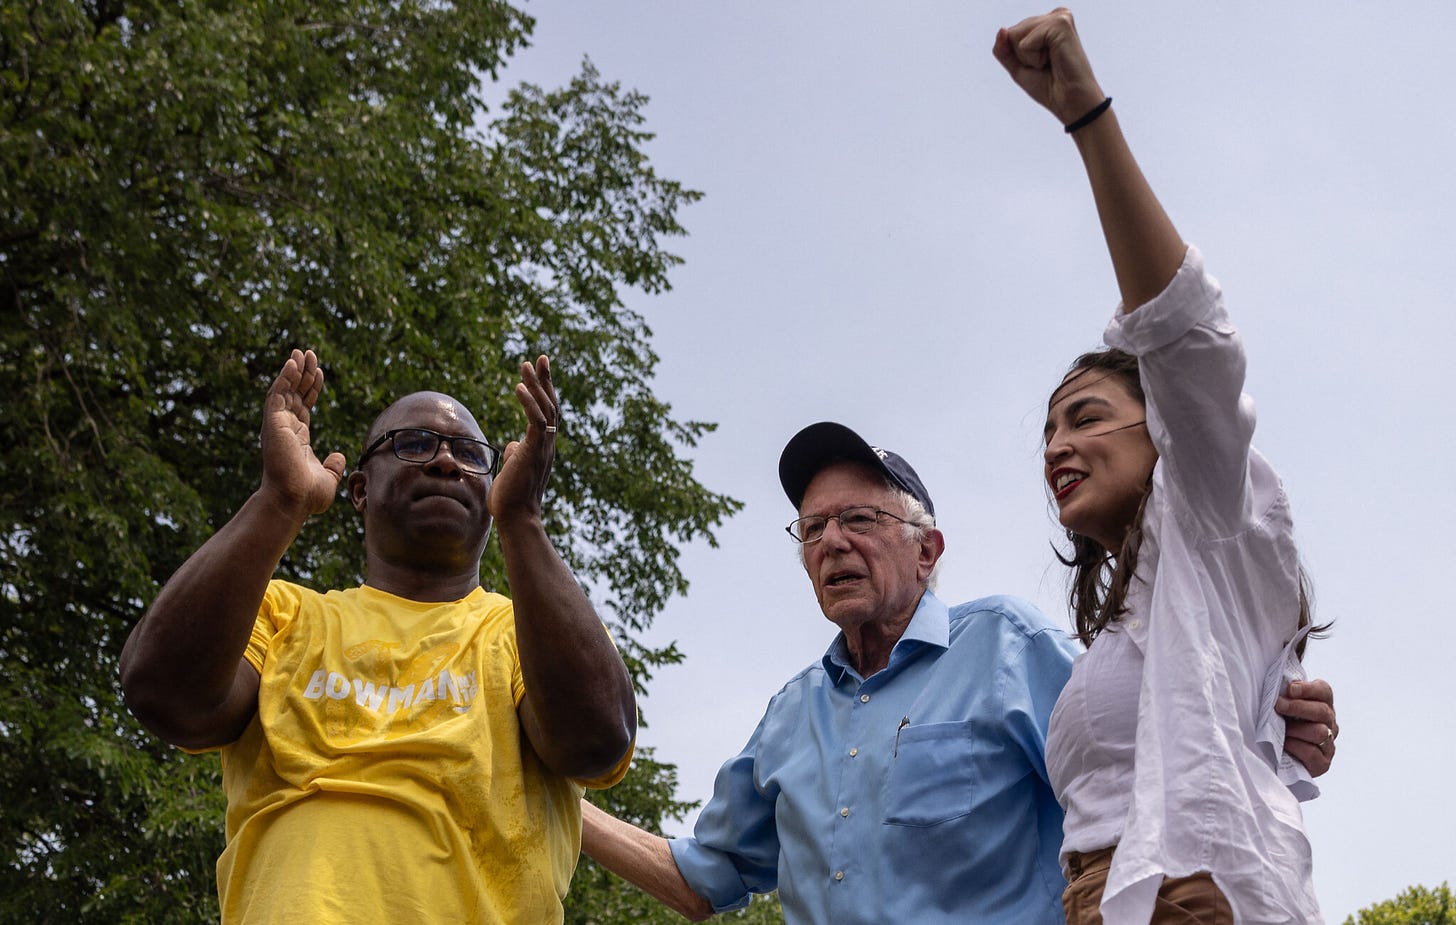 Sanders, Ocasio-Cortez slam AIPAC funding of rival at Bowman rally in NYC |  The Times of Israel